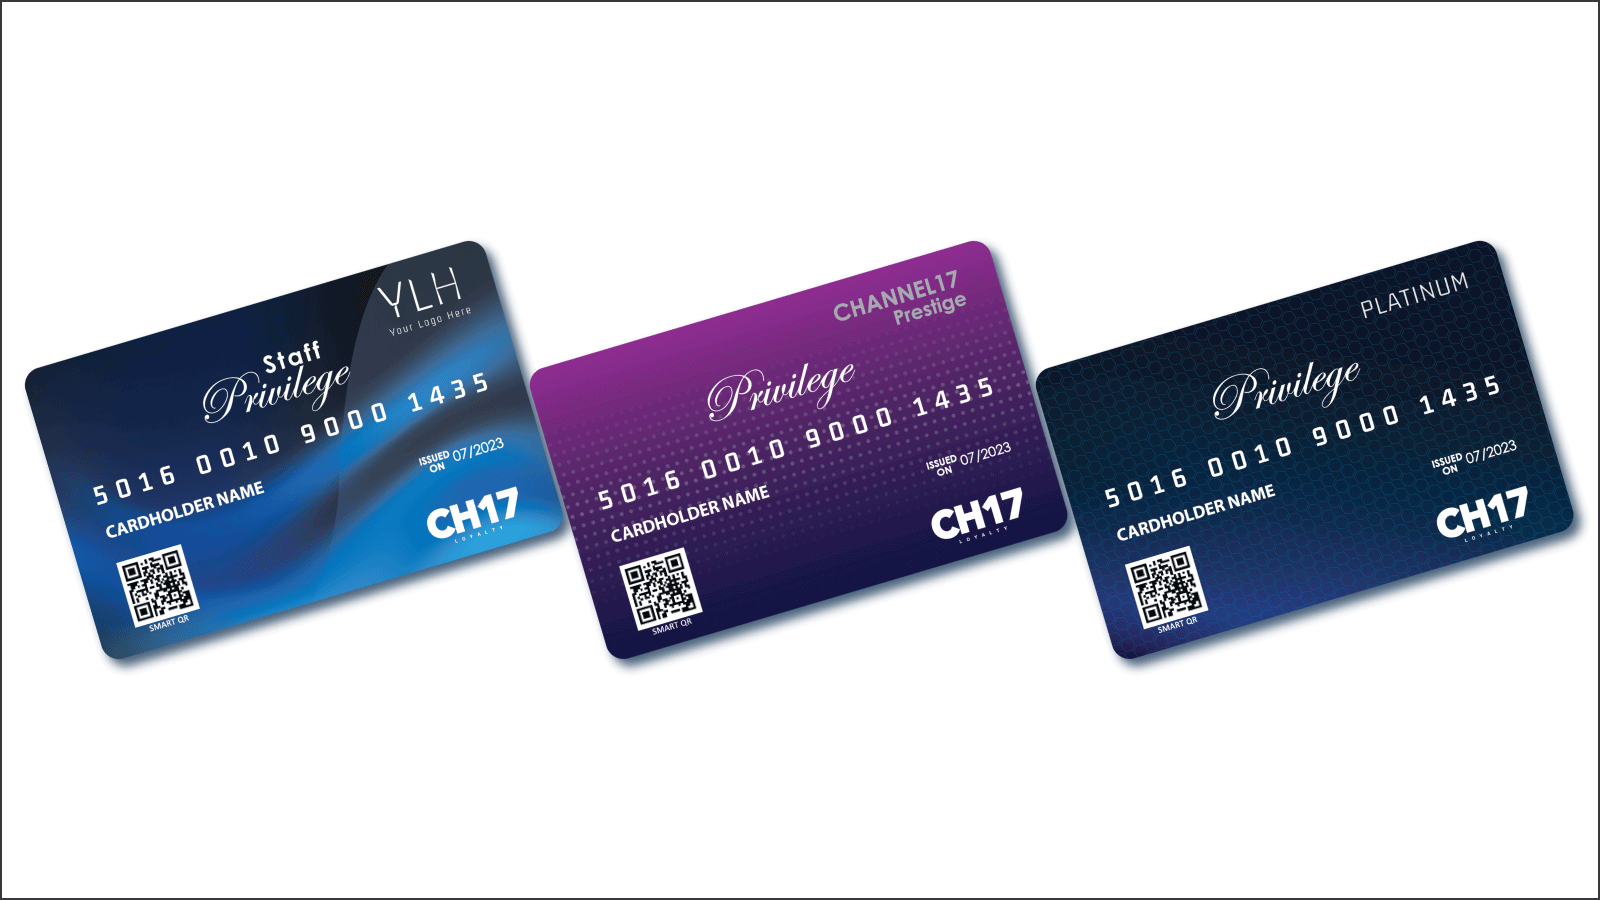 CH17 Loyalty Unveils Exclusive Card Schemes and Unbeatable Merchant Offers!